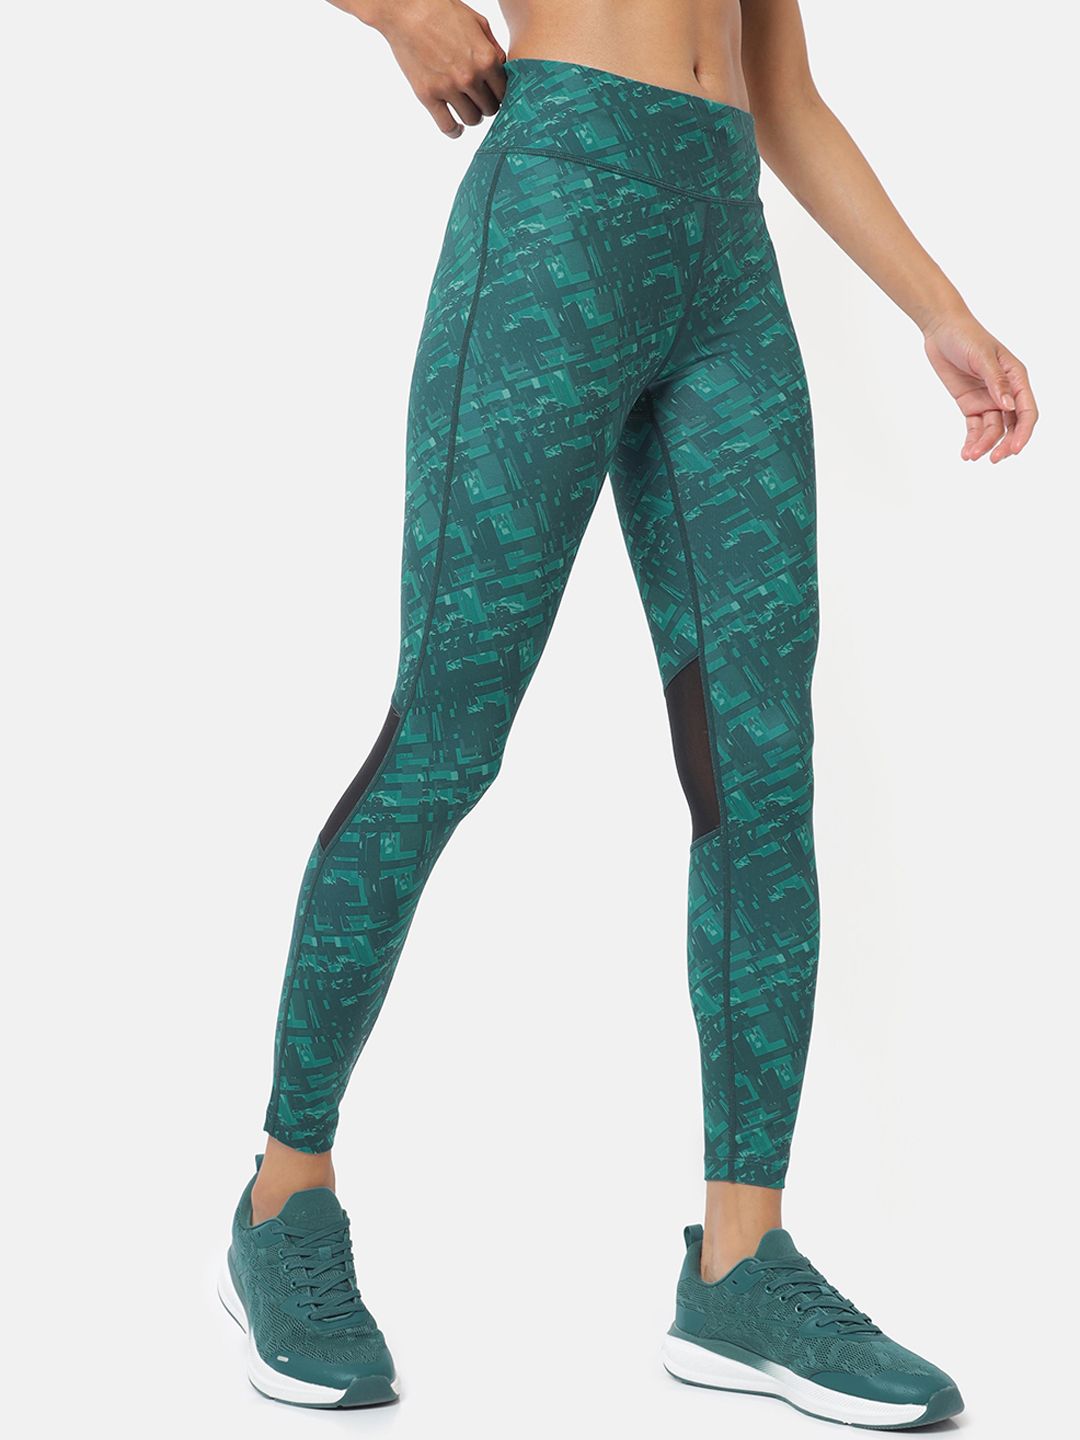 Cultsport Women Green Printed Tights With Rapid Dry Technology Price in India